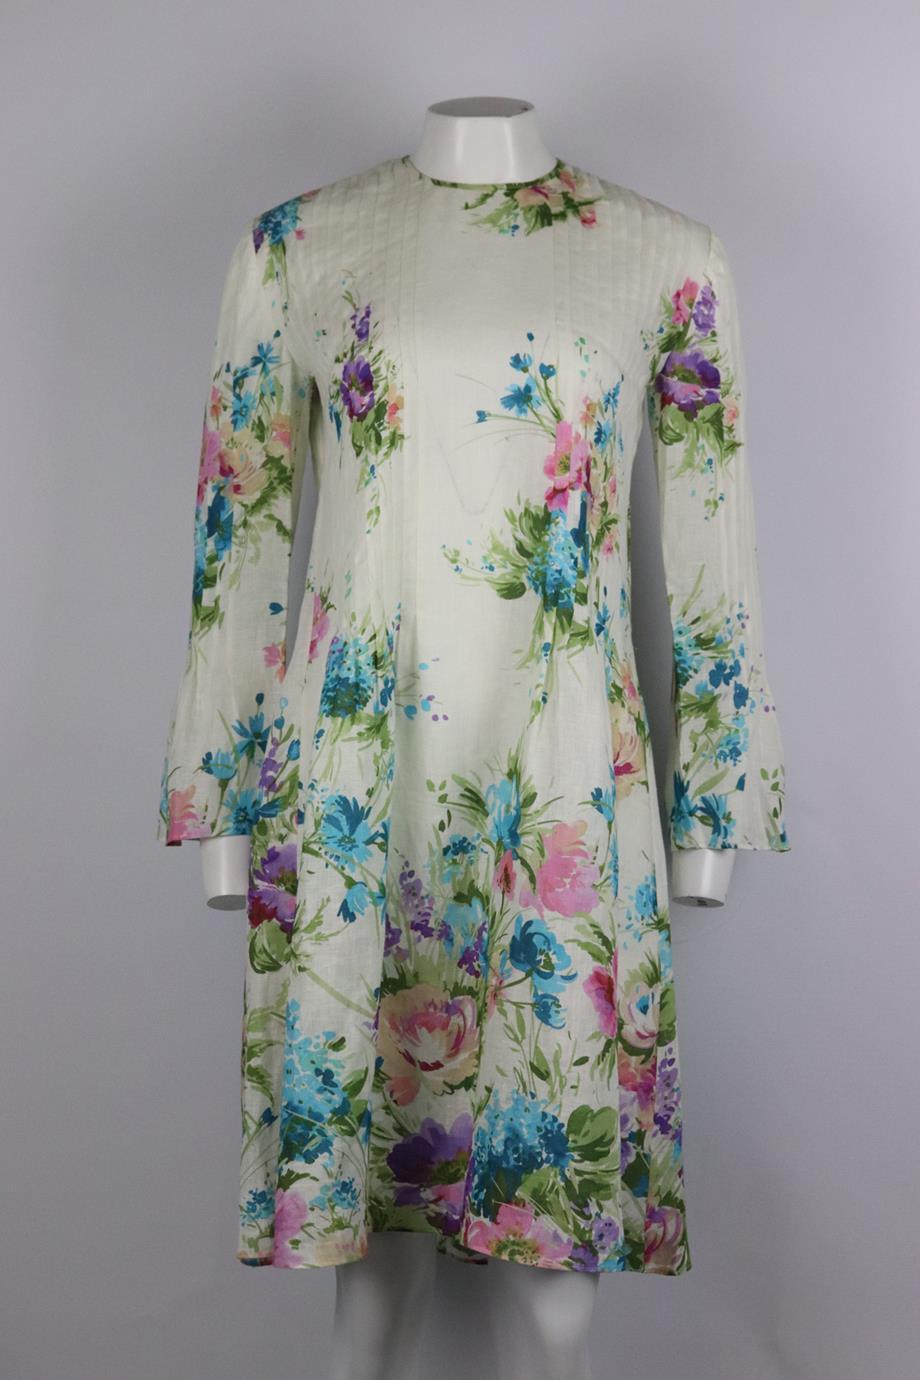 Gucci floral print linen dress. Multicoloured. Long sleeve, crewneck. Zip fastening at back. 100% Linen. Size: IT 40 (UK 8, US 4, FR 36). Bust: 38 in. Waist: 36 in. Hips: 42 in. Length: 40 in. Very good condition - As new condition, no sign of wear;